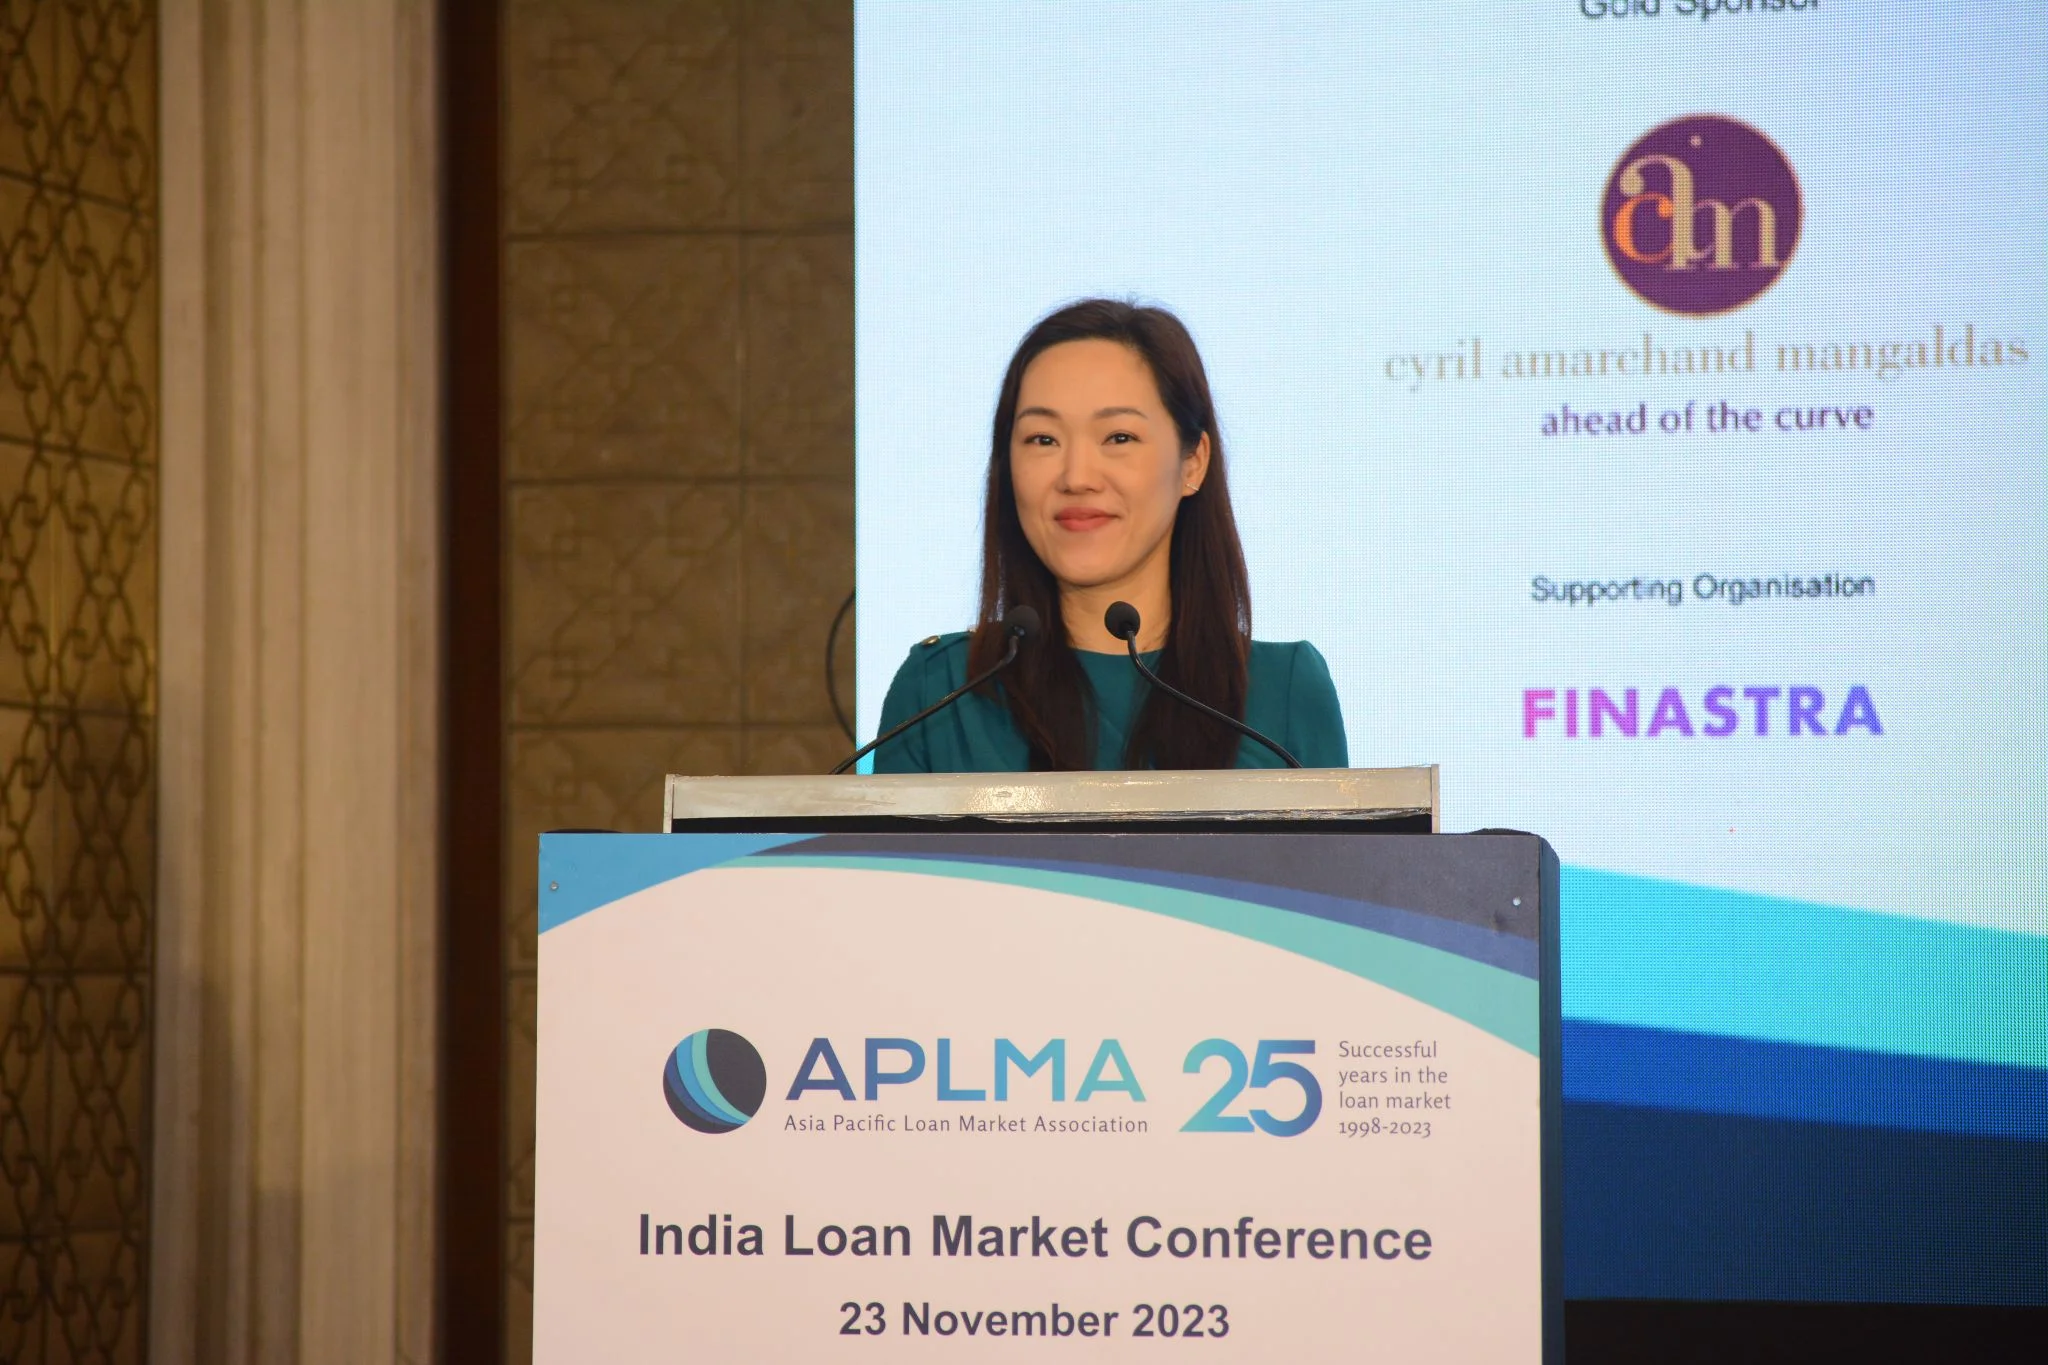 Delighted to participate in the India Loan Market Conference